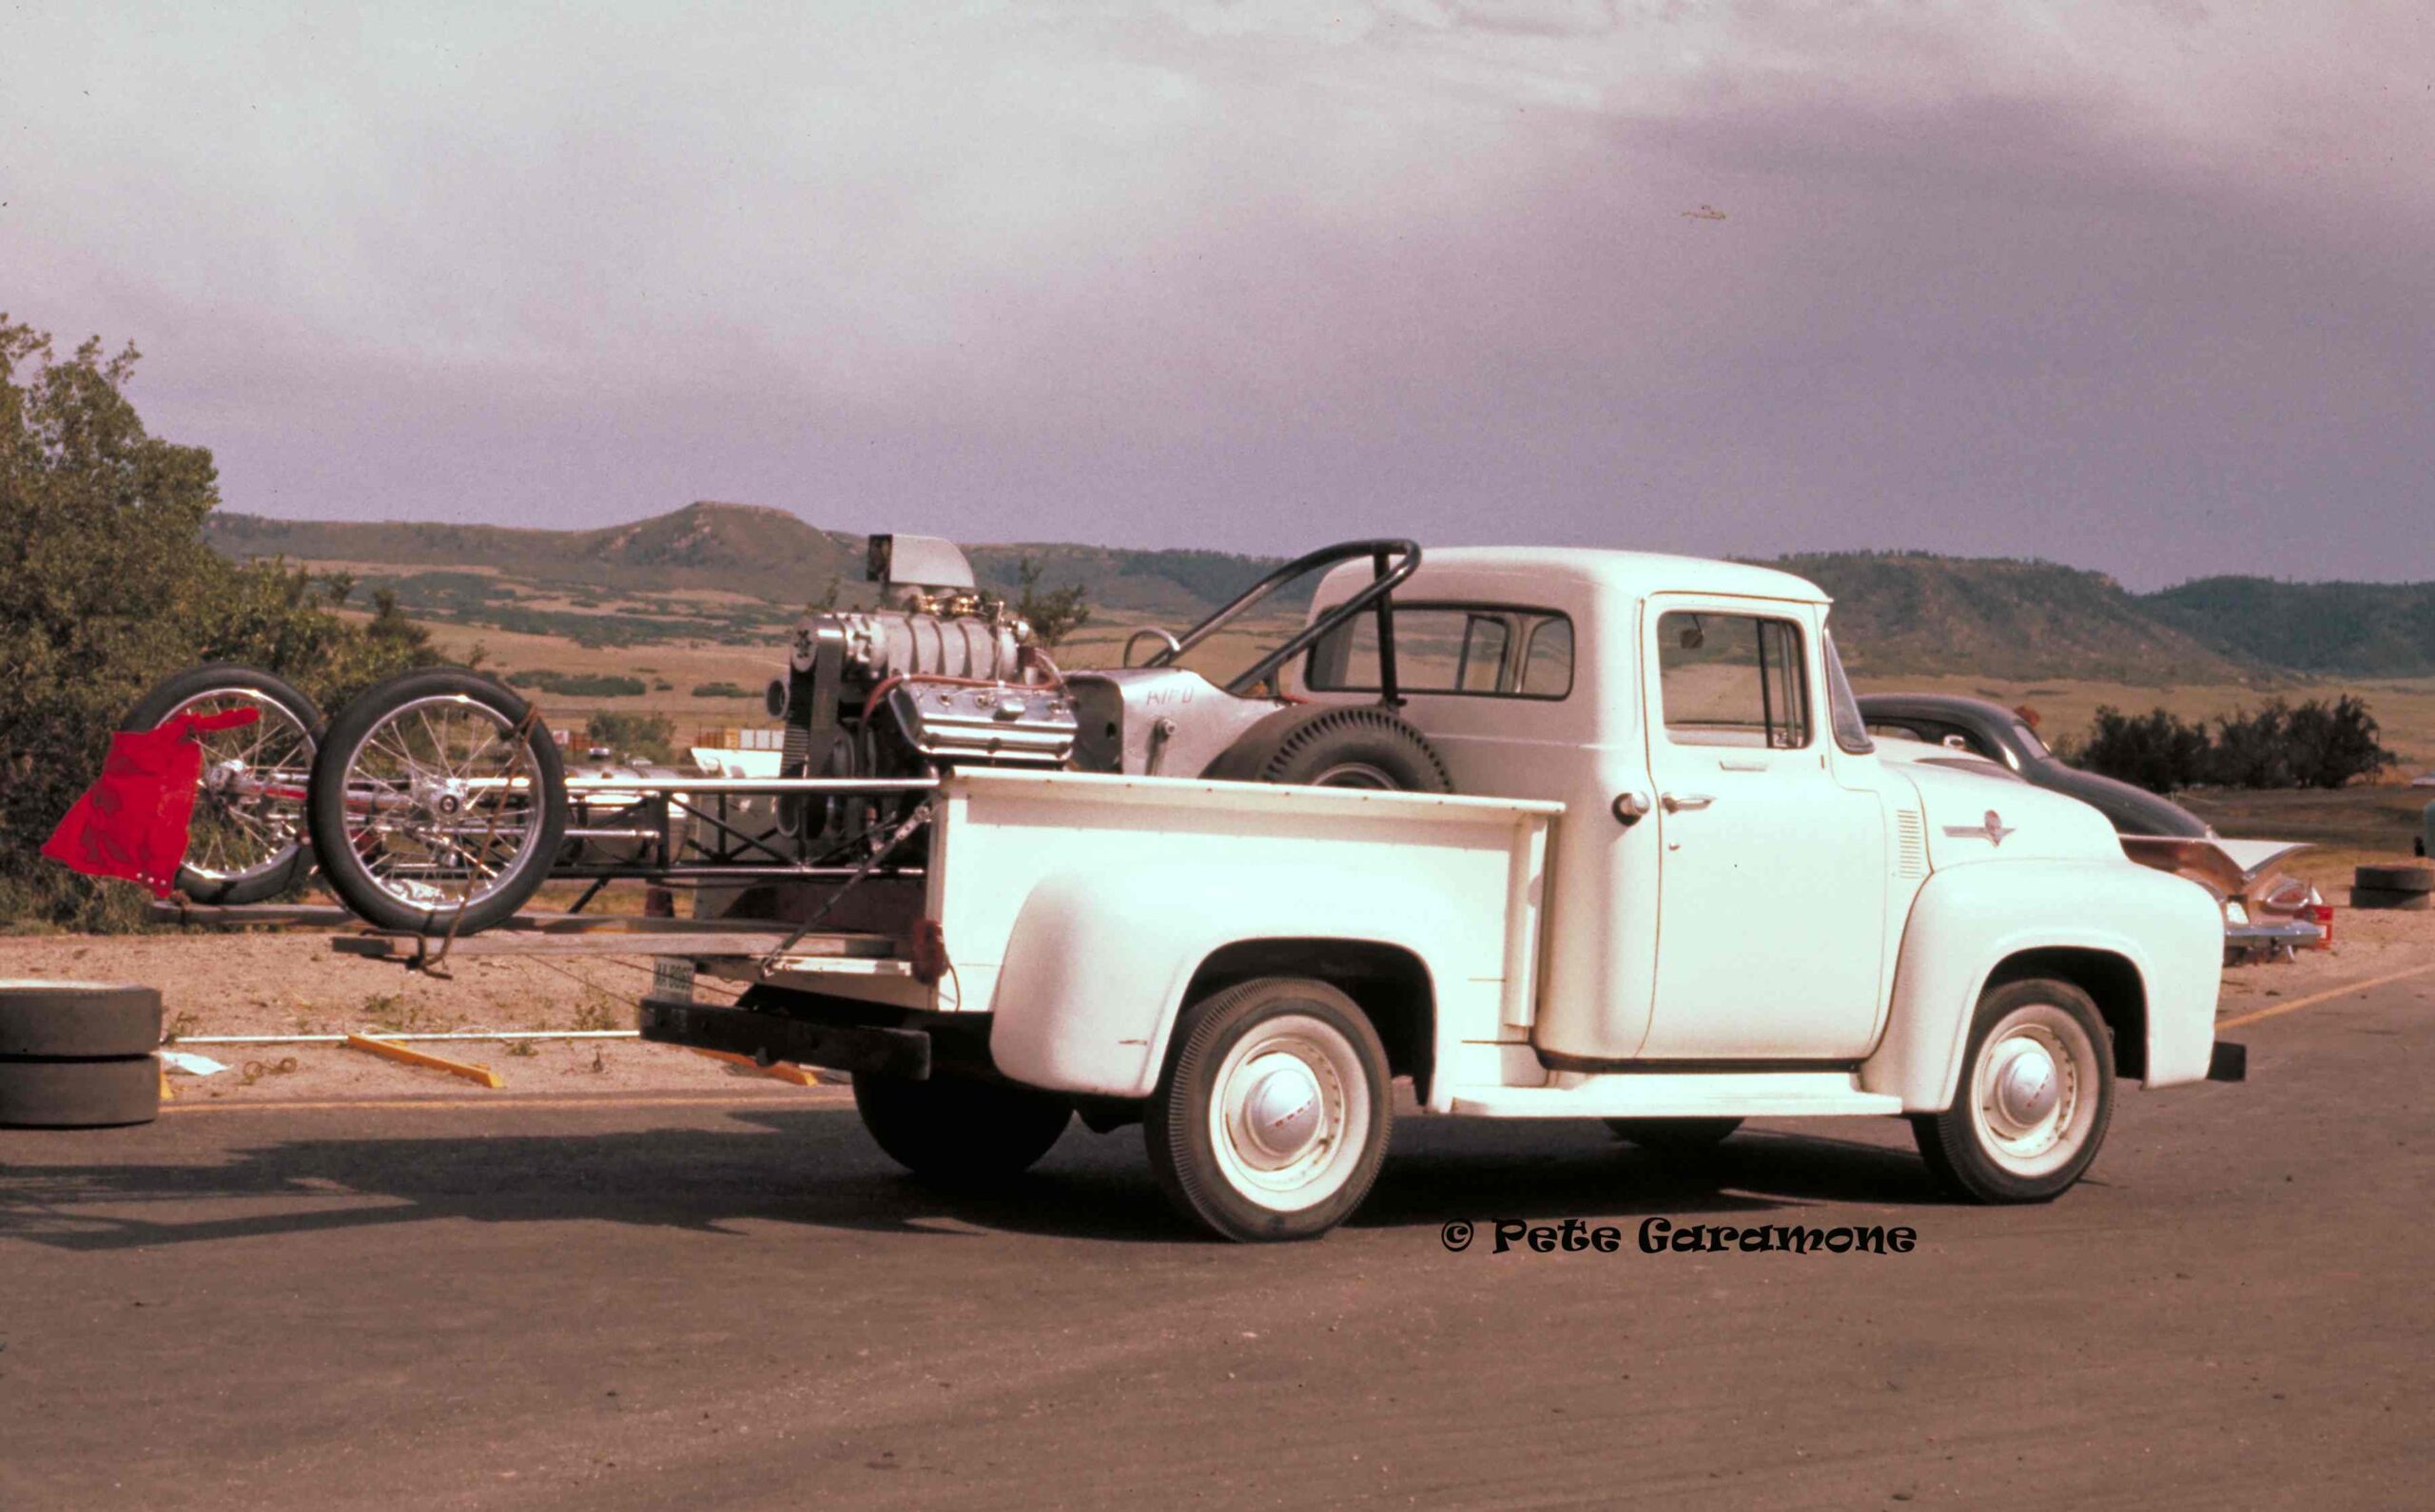 A picture of a white truck carrying a vintage motor